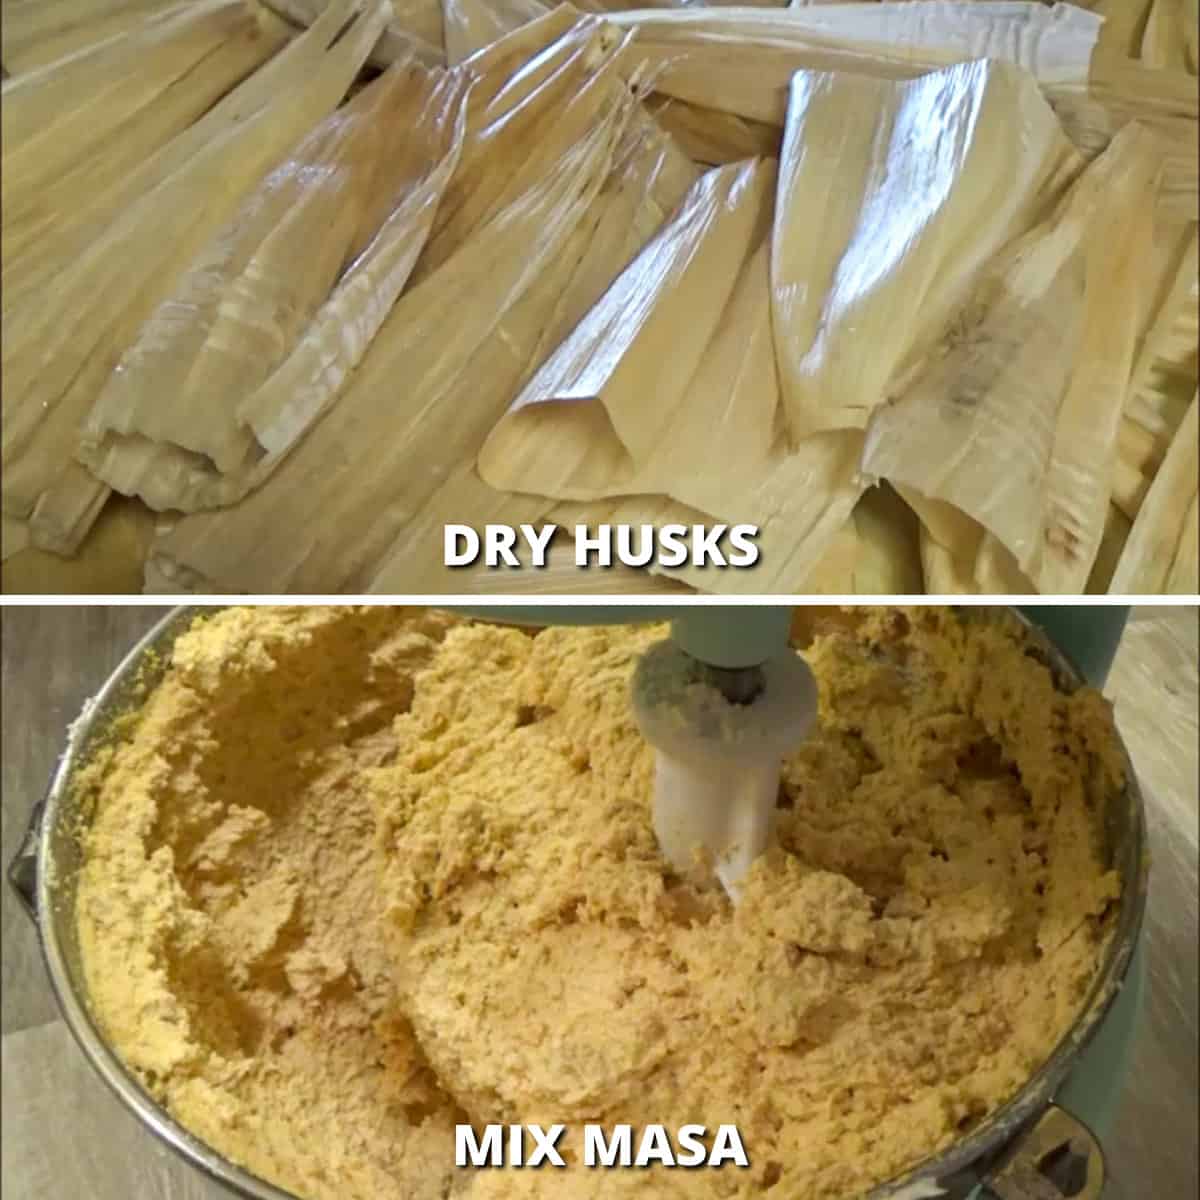 Process shots of air-drying corn husks on a towel and mixing masa dough in an electric stand mixer.